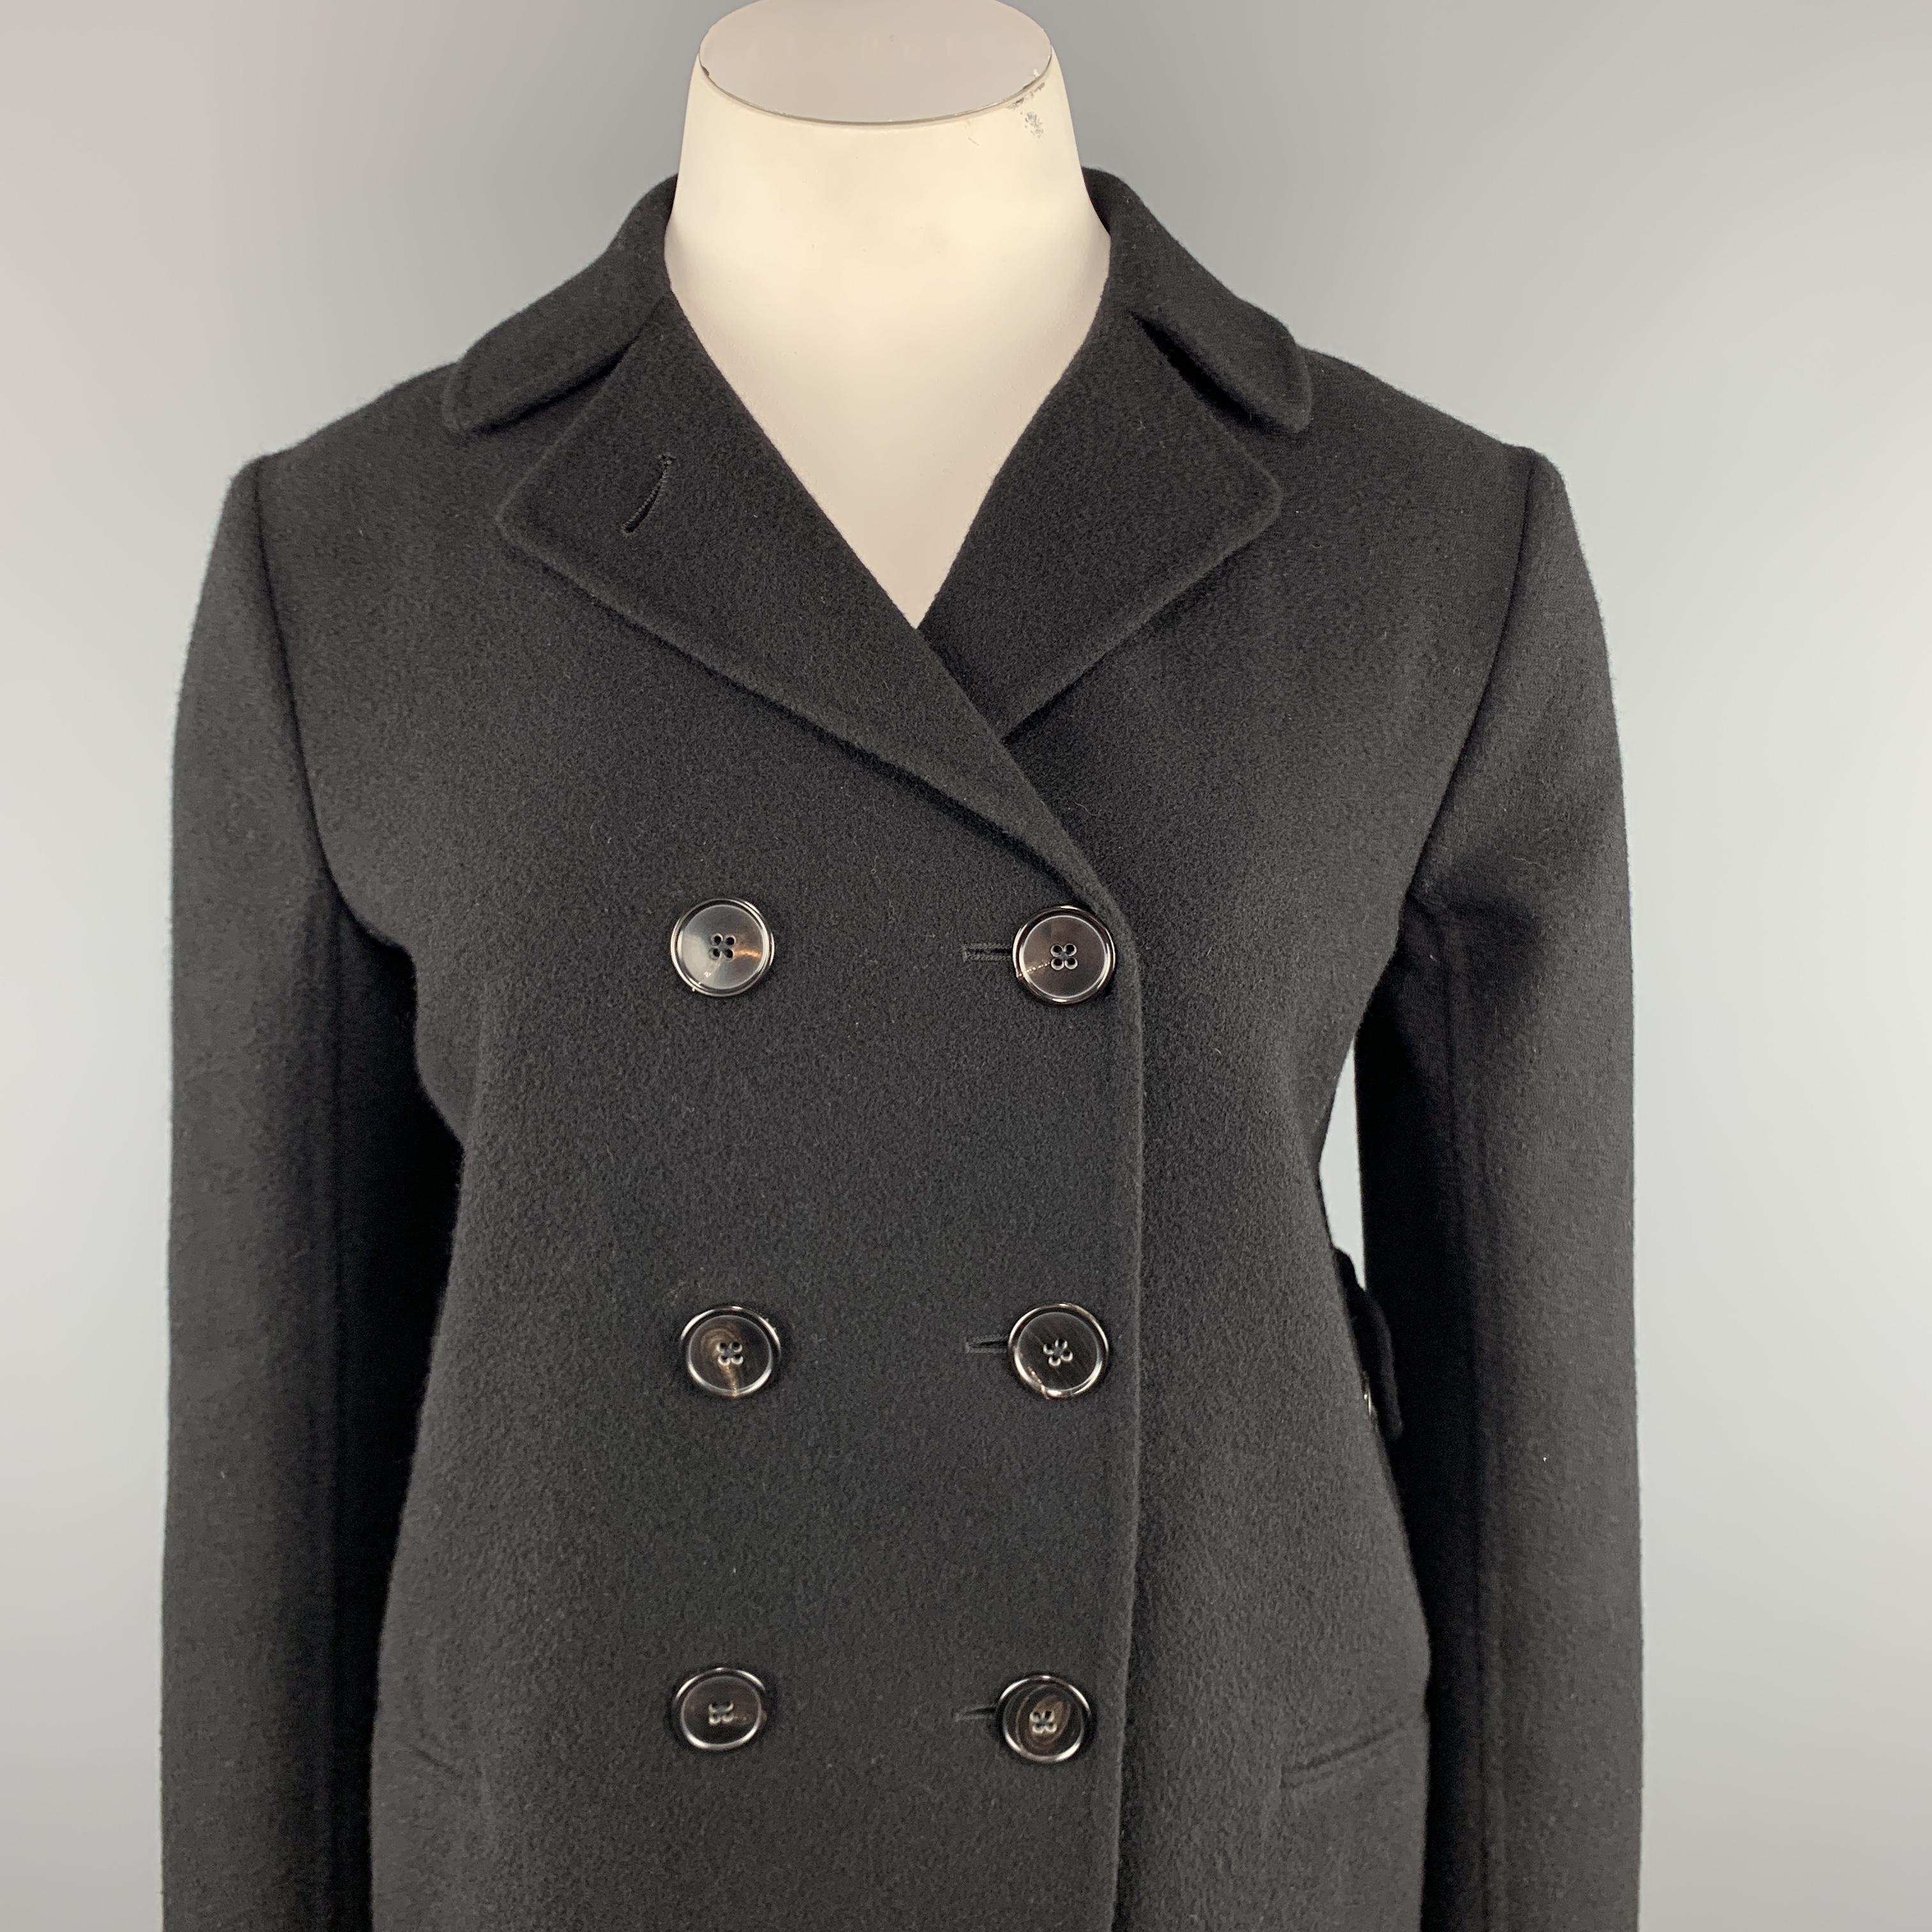 JIL SANDER coat comes in cashmere knit flannel with a pointed lapel, double breasted button up front, button tabs, and slanted slit pockets. Made In Italy.

Excellent Pre-Owned Condition. Retails: $2,500.00.
Marked: DE 40

Measurements:

Shoulder: